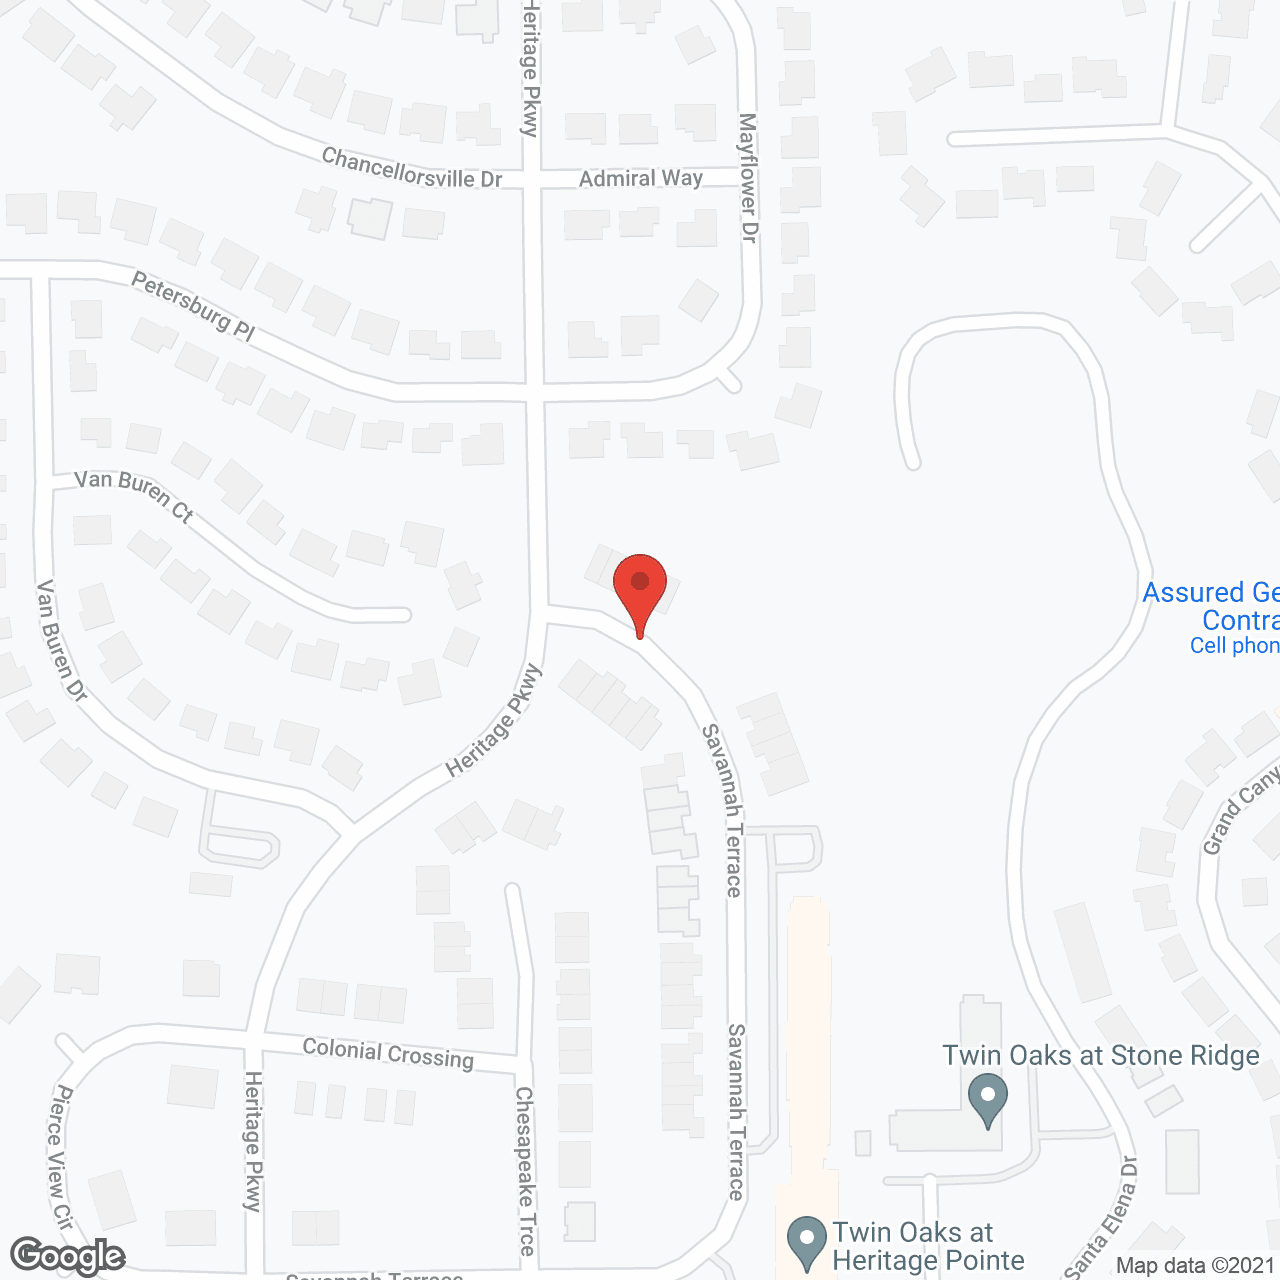 Twin Oaks at Heritage Pointe in google map